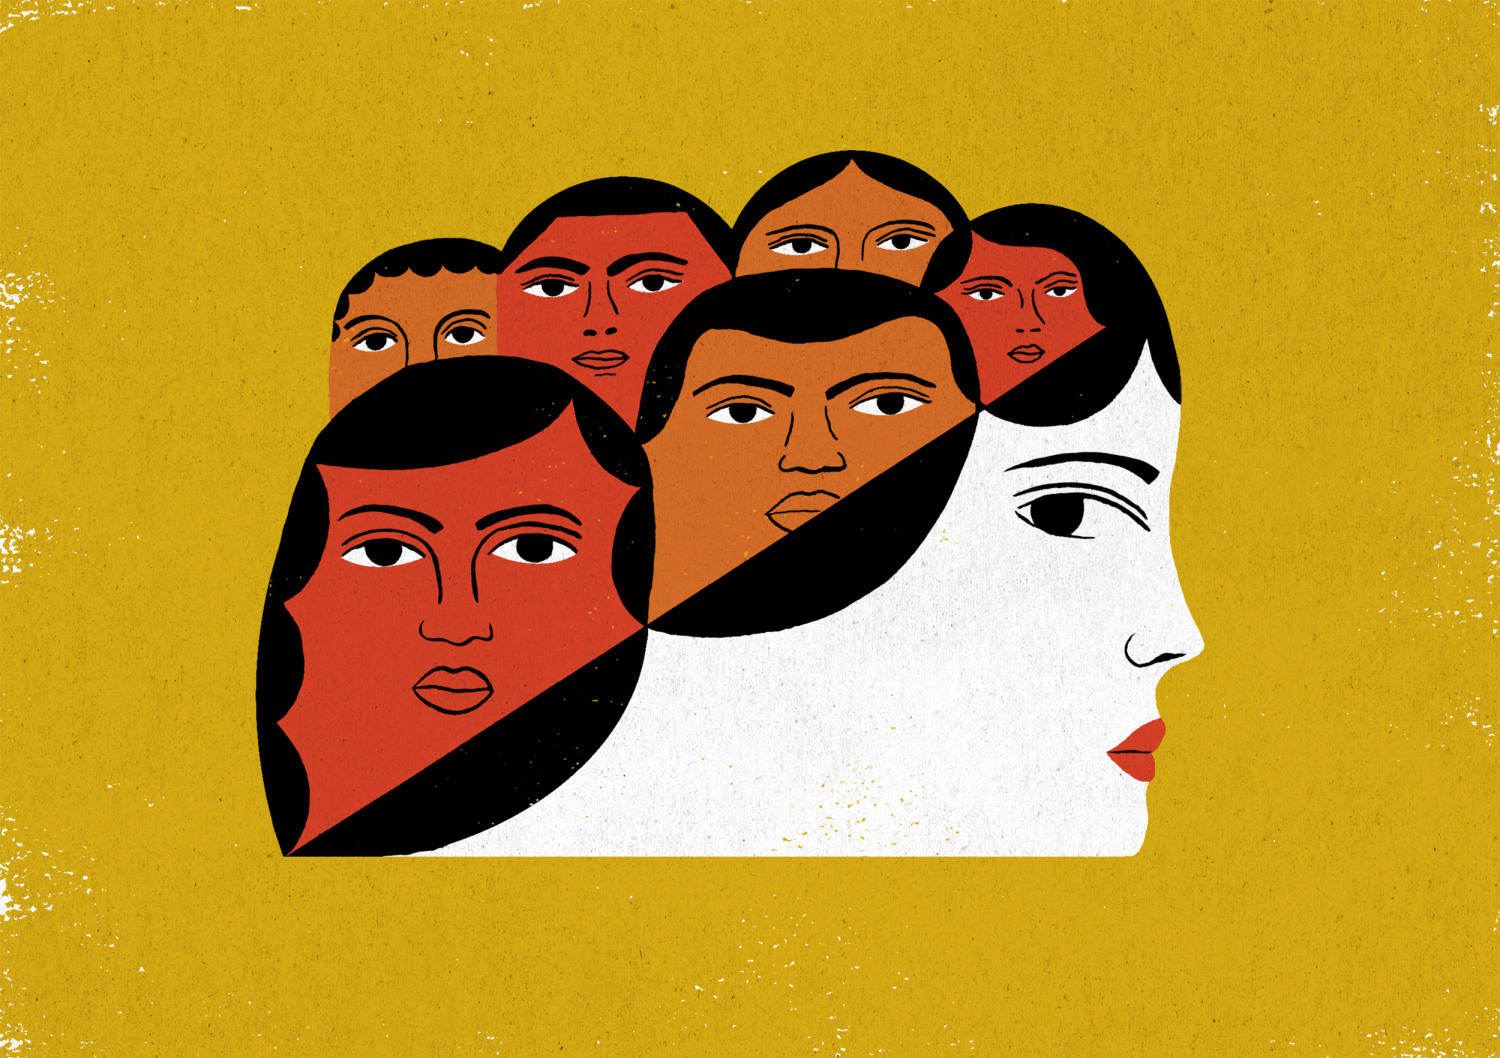 Does studying race differences lead to racism?